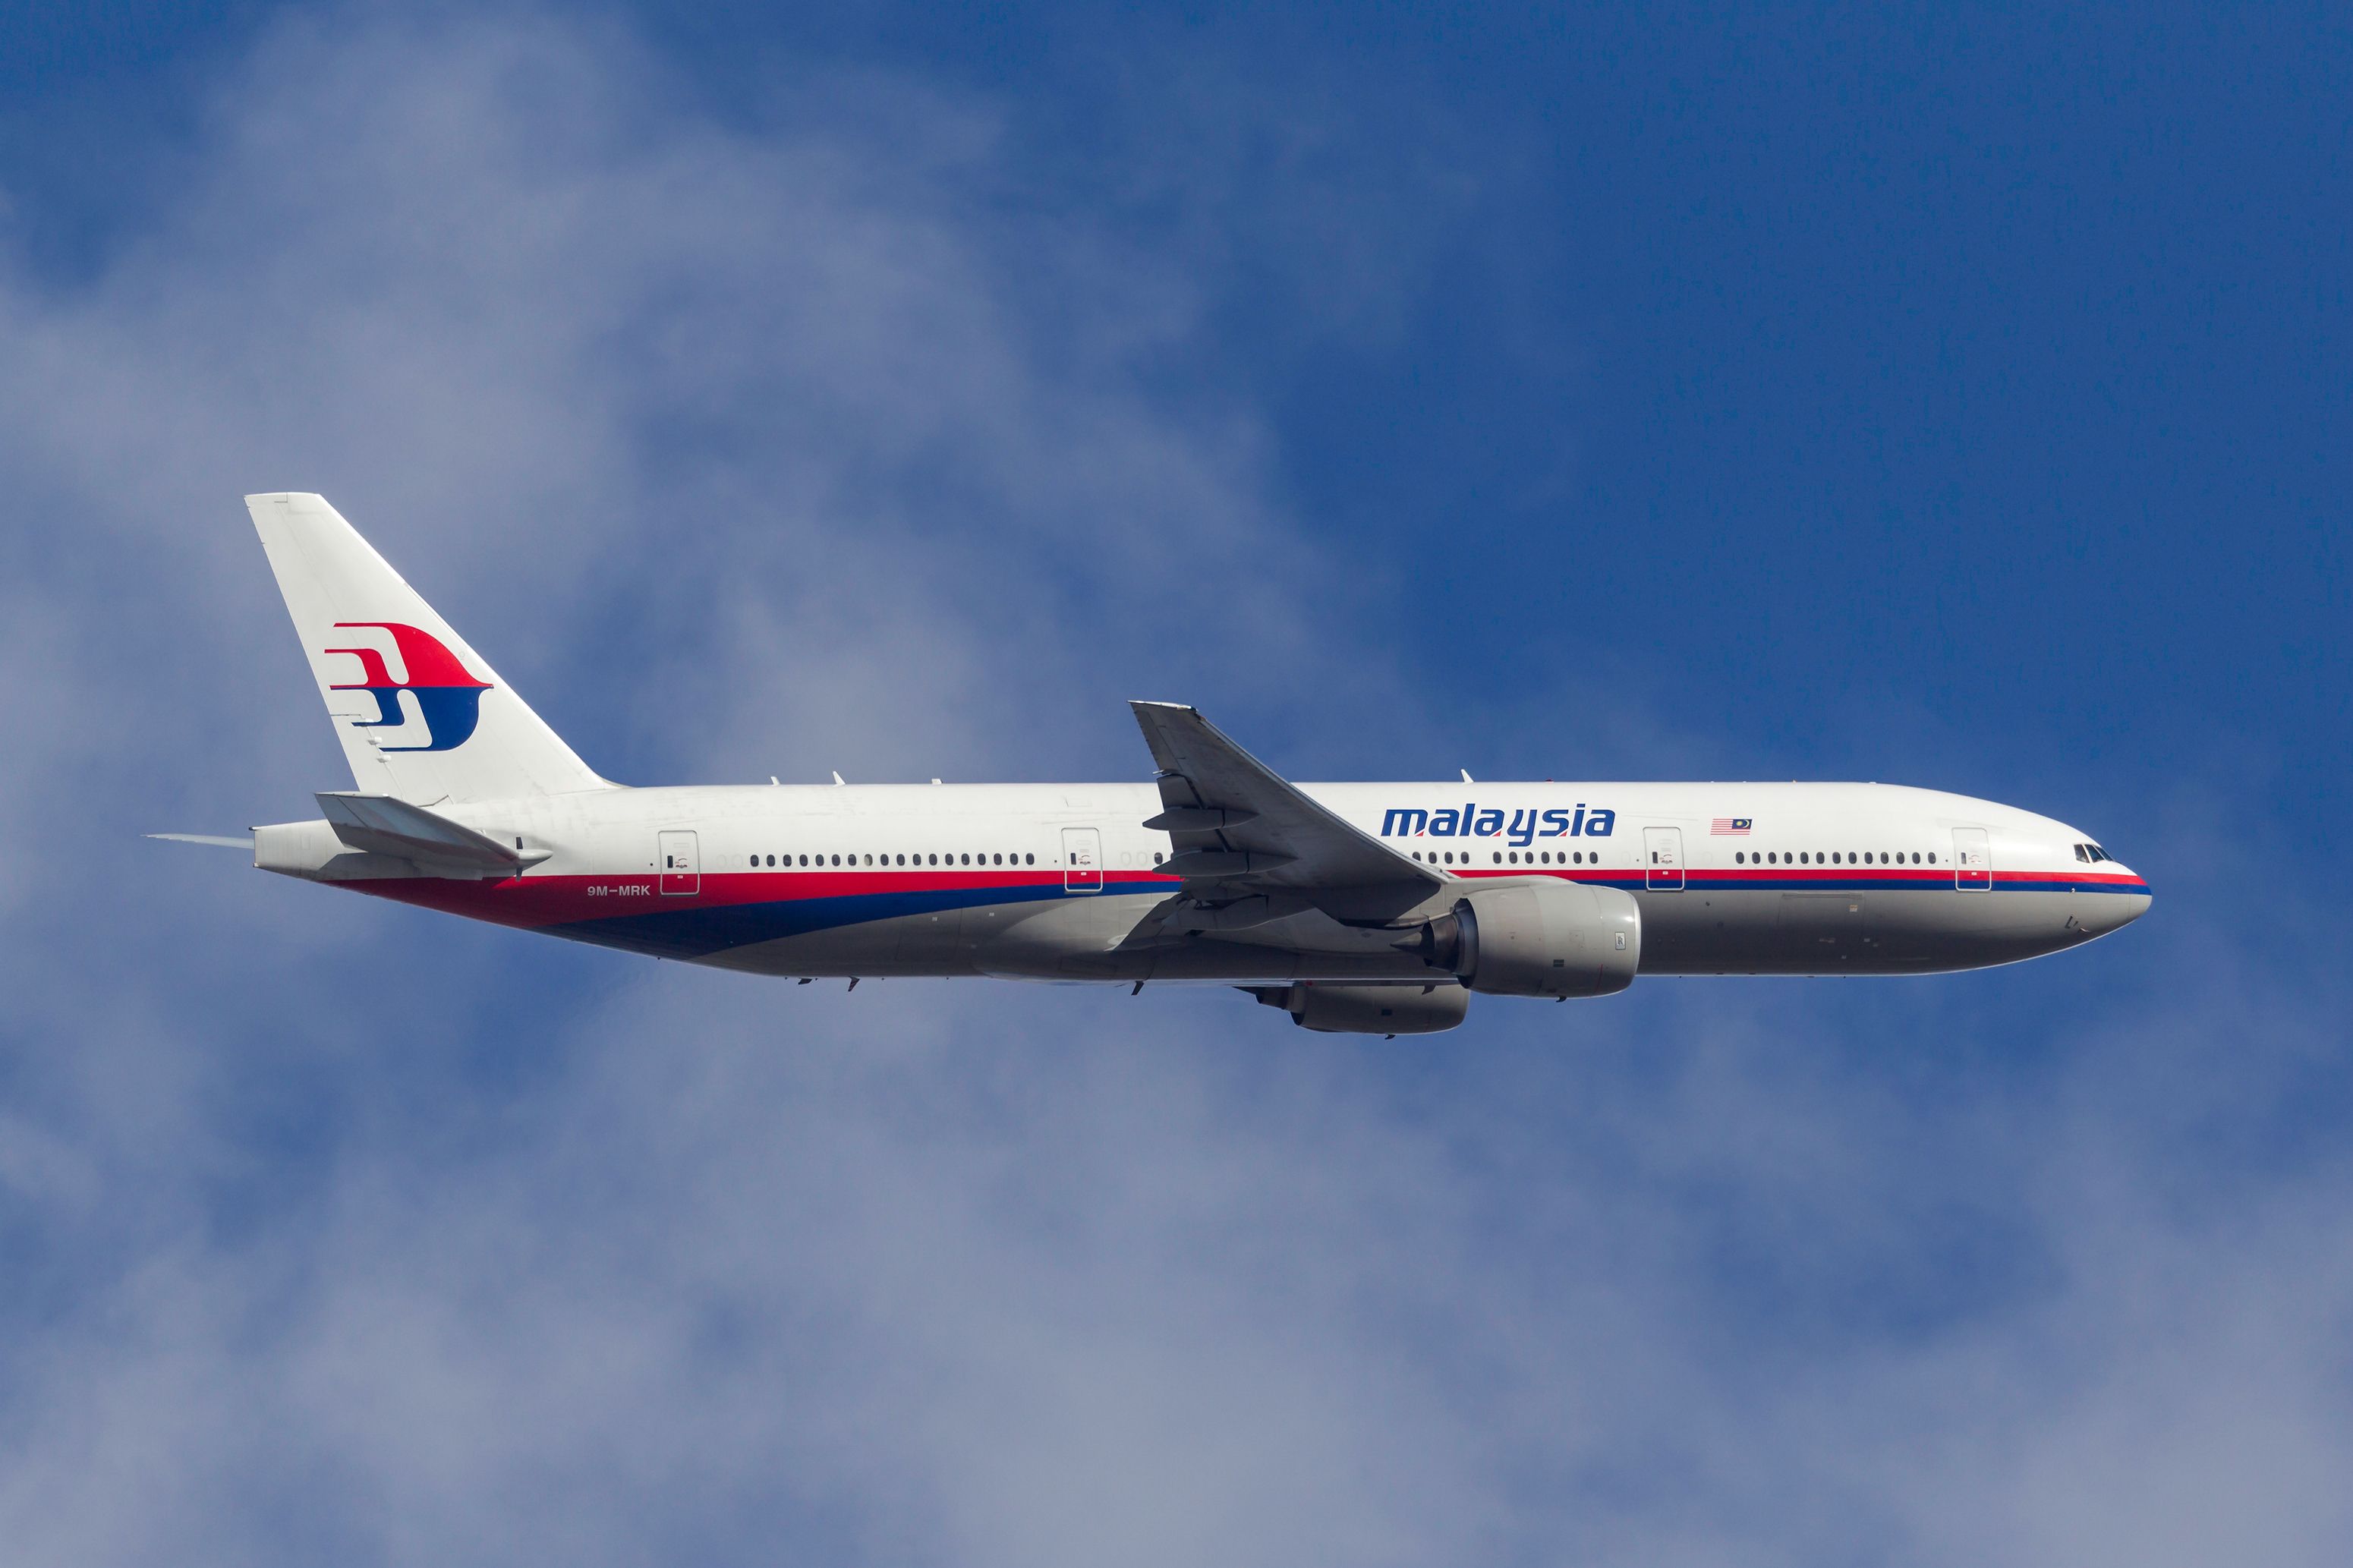 Malaysia Airlines' Boeing 777